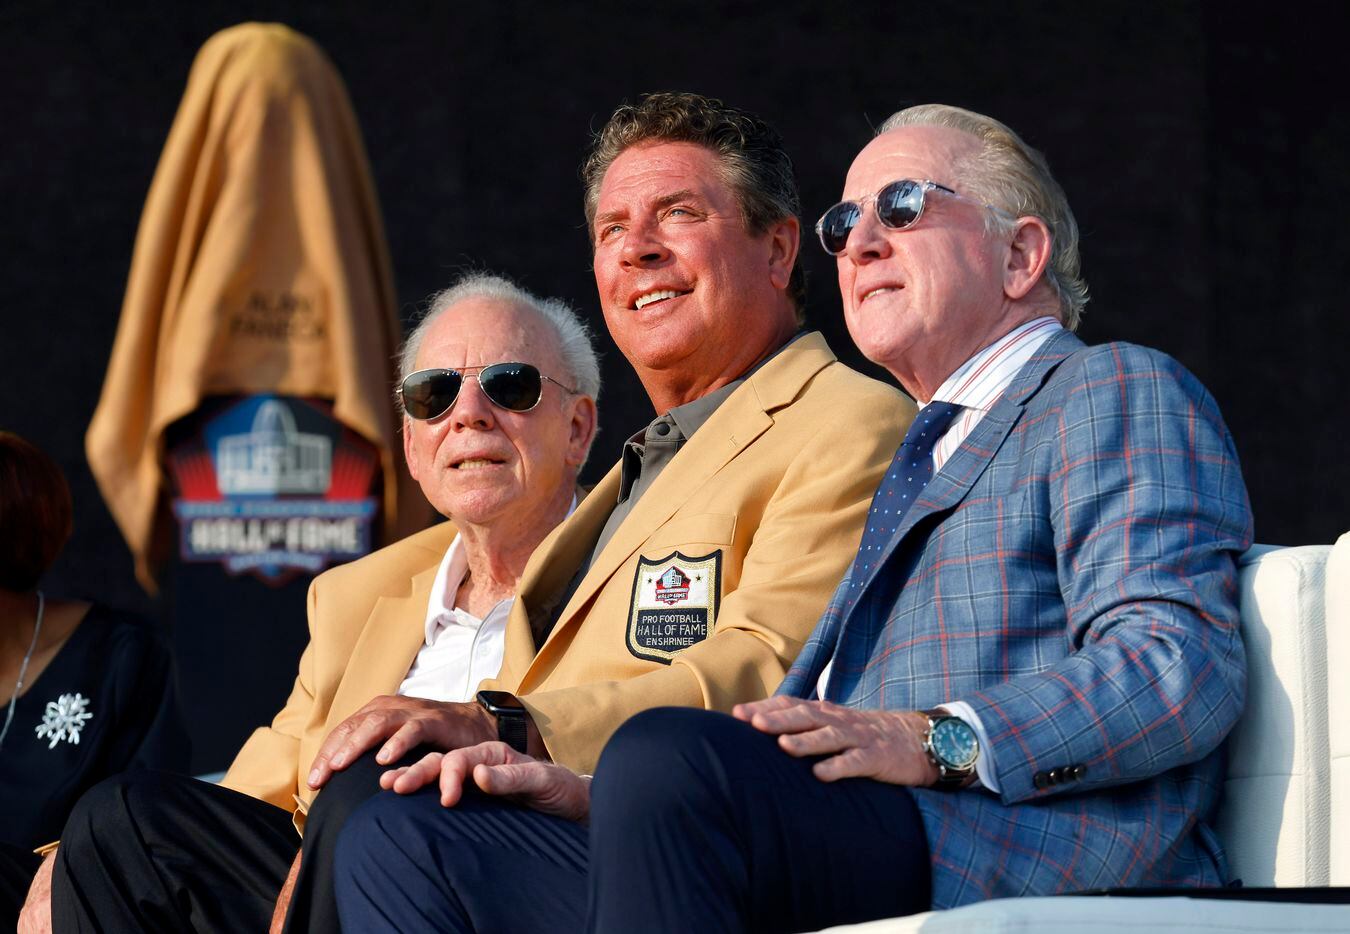 Pro Football Hall of Fame quarterbacks Roger Staubach of the Dallas Cowboys (left), Dan Marino of the Miami Dolphins (center) and former New Orleans Saints quarterback Archie Manning pose for a photo before the Class of 2021 enshrinement ceremony at Tom Benson Hall of Fame Stadium in Canton, Ohio, Sunday, August 8, 2021. Manning was onstage as a presenter for his son, Peyton Manning. (Tom Fox/The Dallas Morning News)